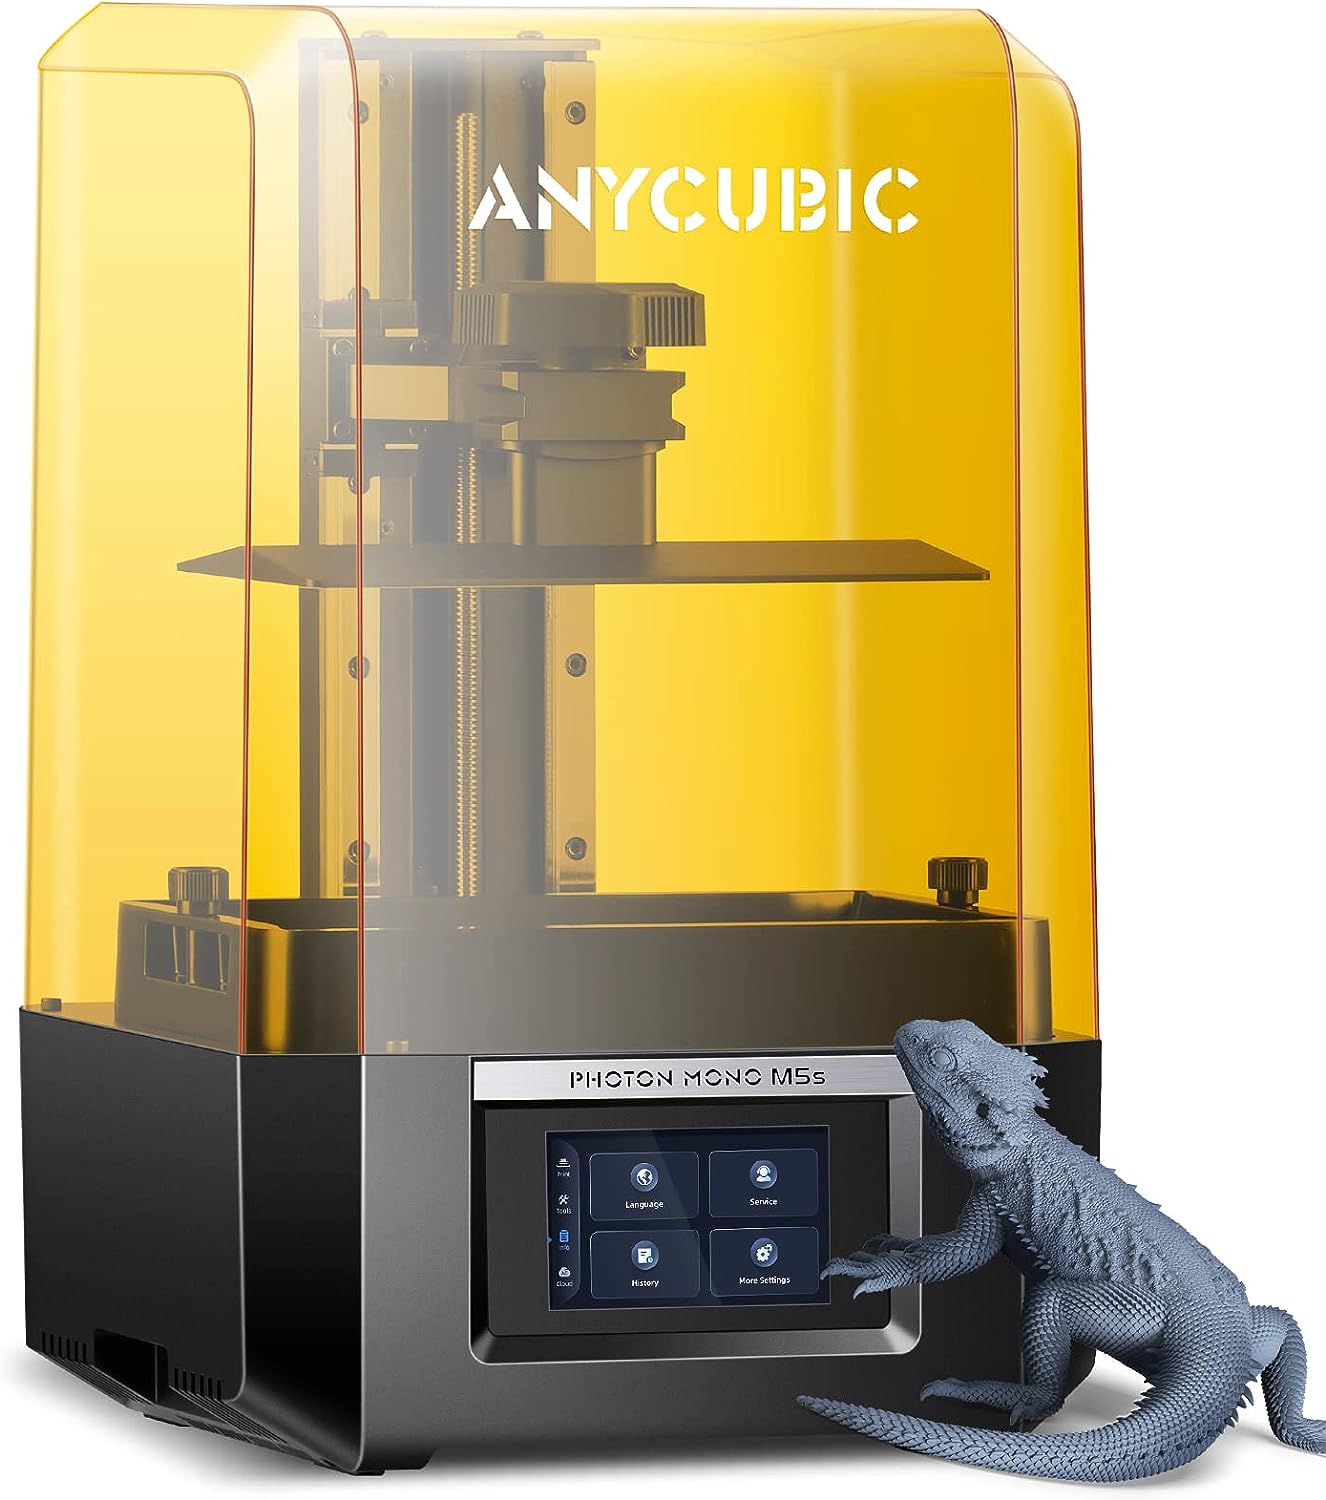 Anycubic Photon Mono M5s 12k Resin 3d Printer Review 2607